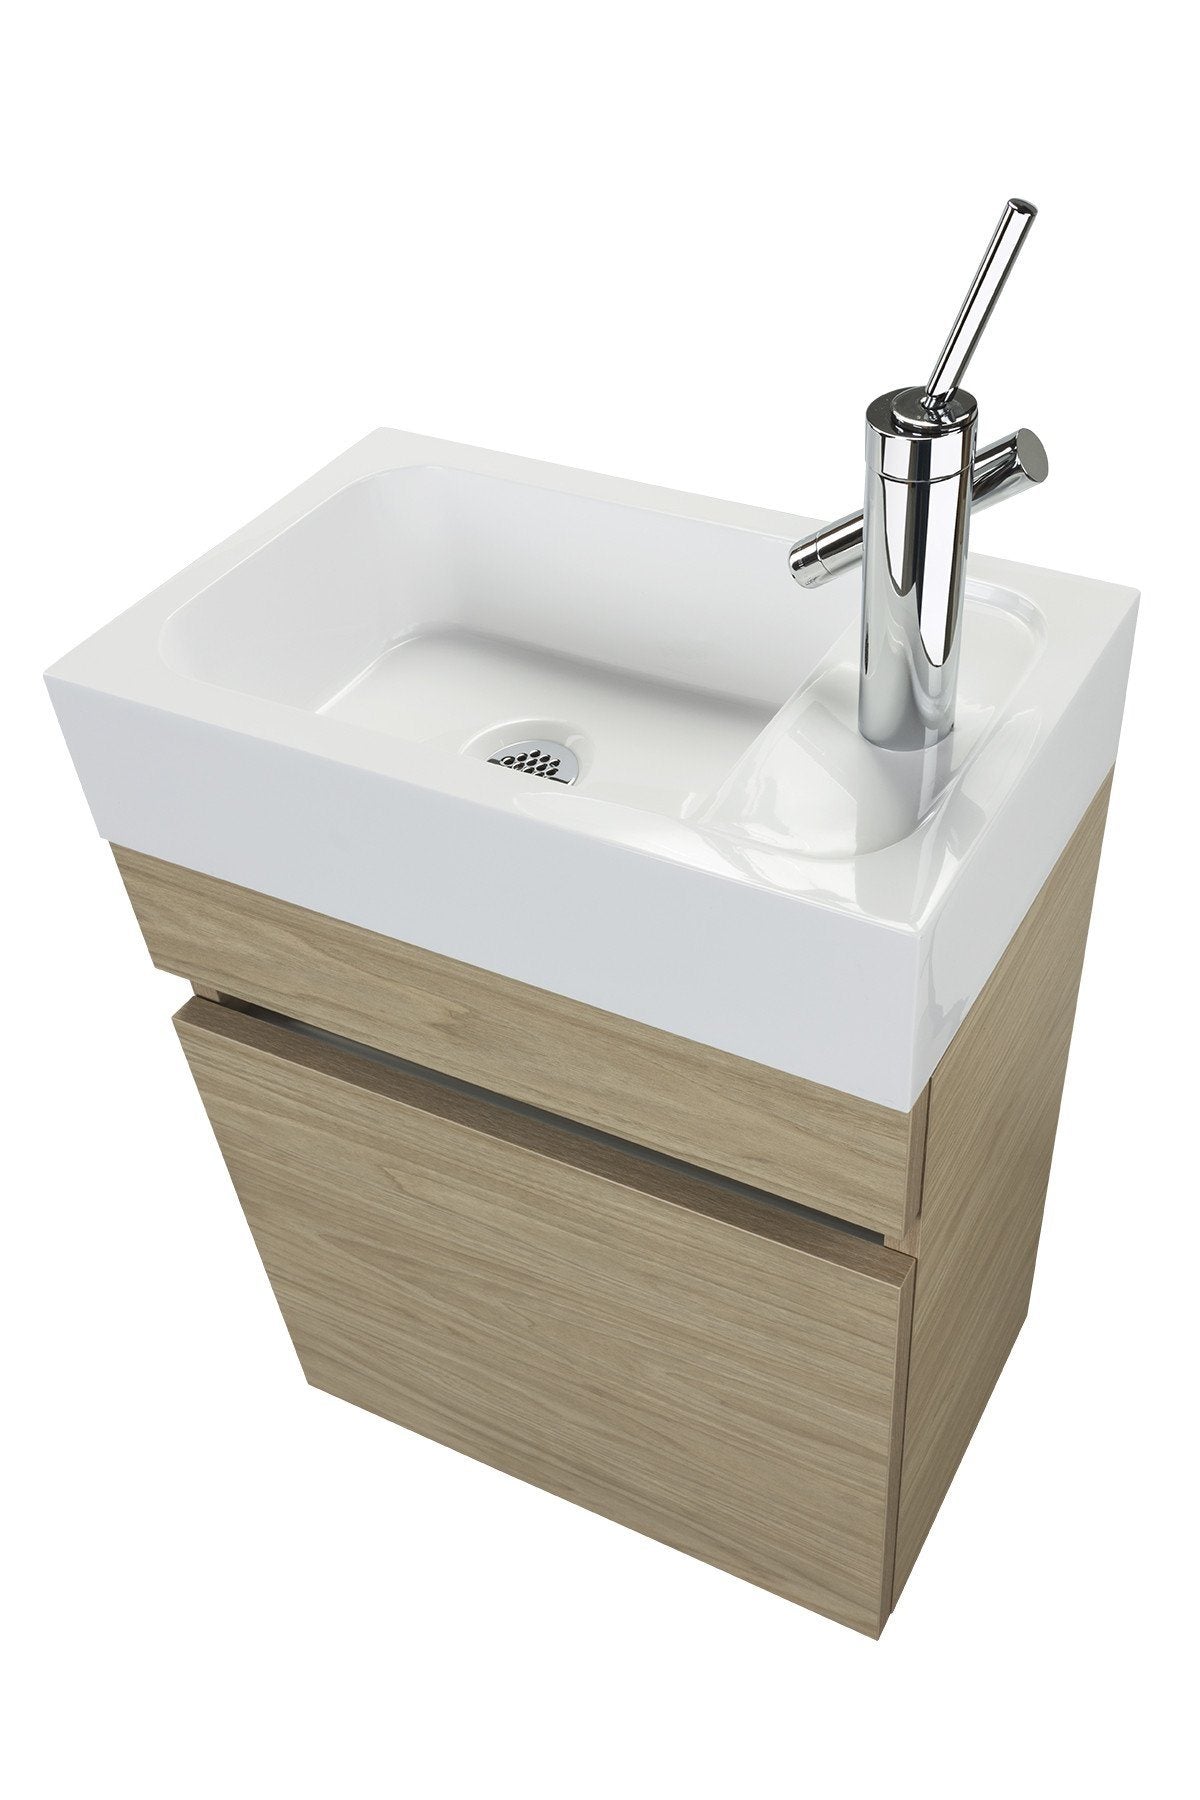 CASTING AT FIRST LIGHT 18" Space Saver Light Wood Vanity by Cutler Vanity Cutler Kitchen & Bath 